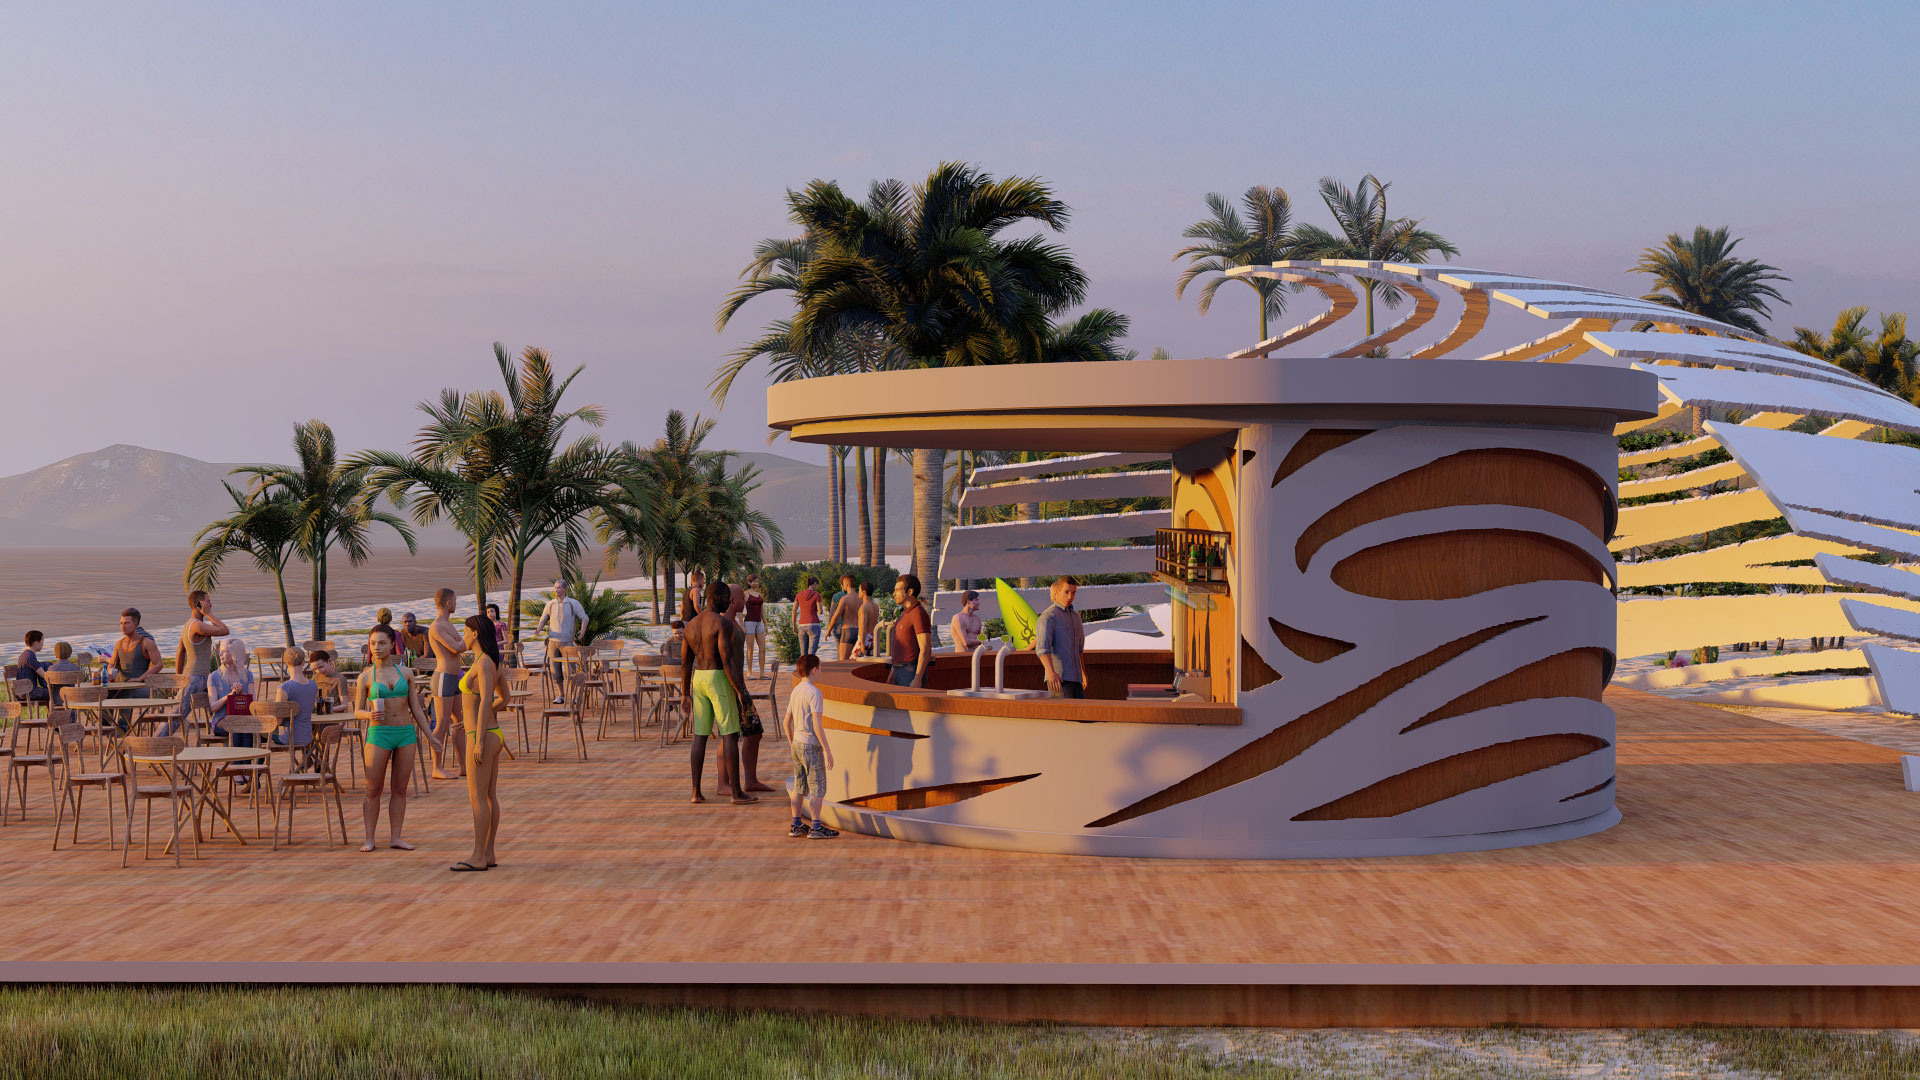 What's the status of Thermal Beach Club project